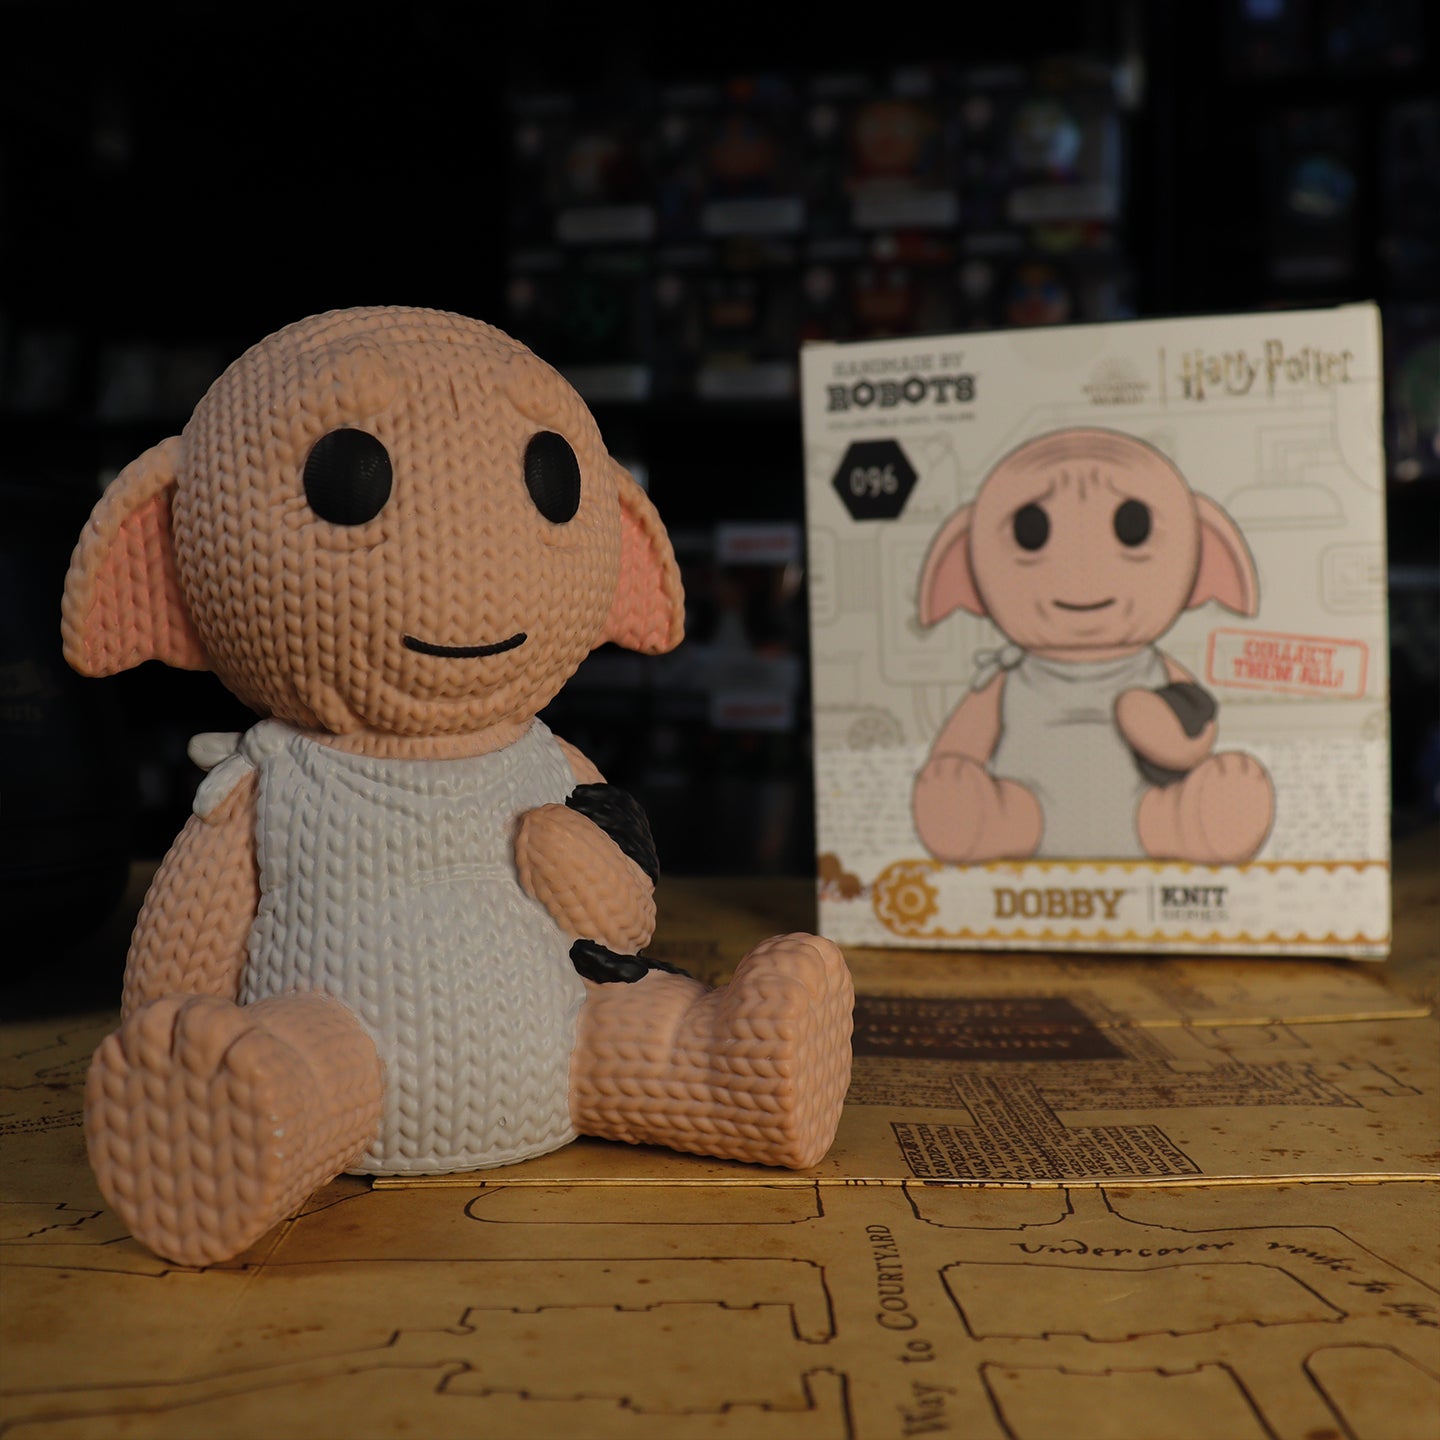 Harry Potter - Dobby Collectible Vinyl Figure from Handmade By Robots